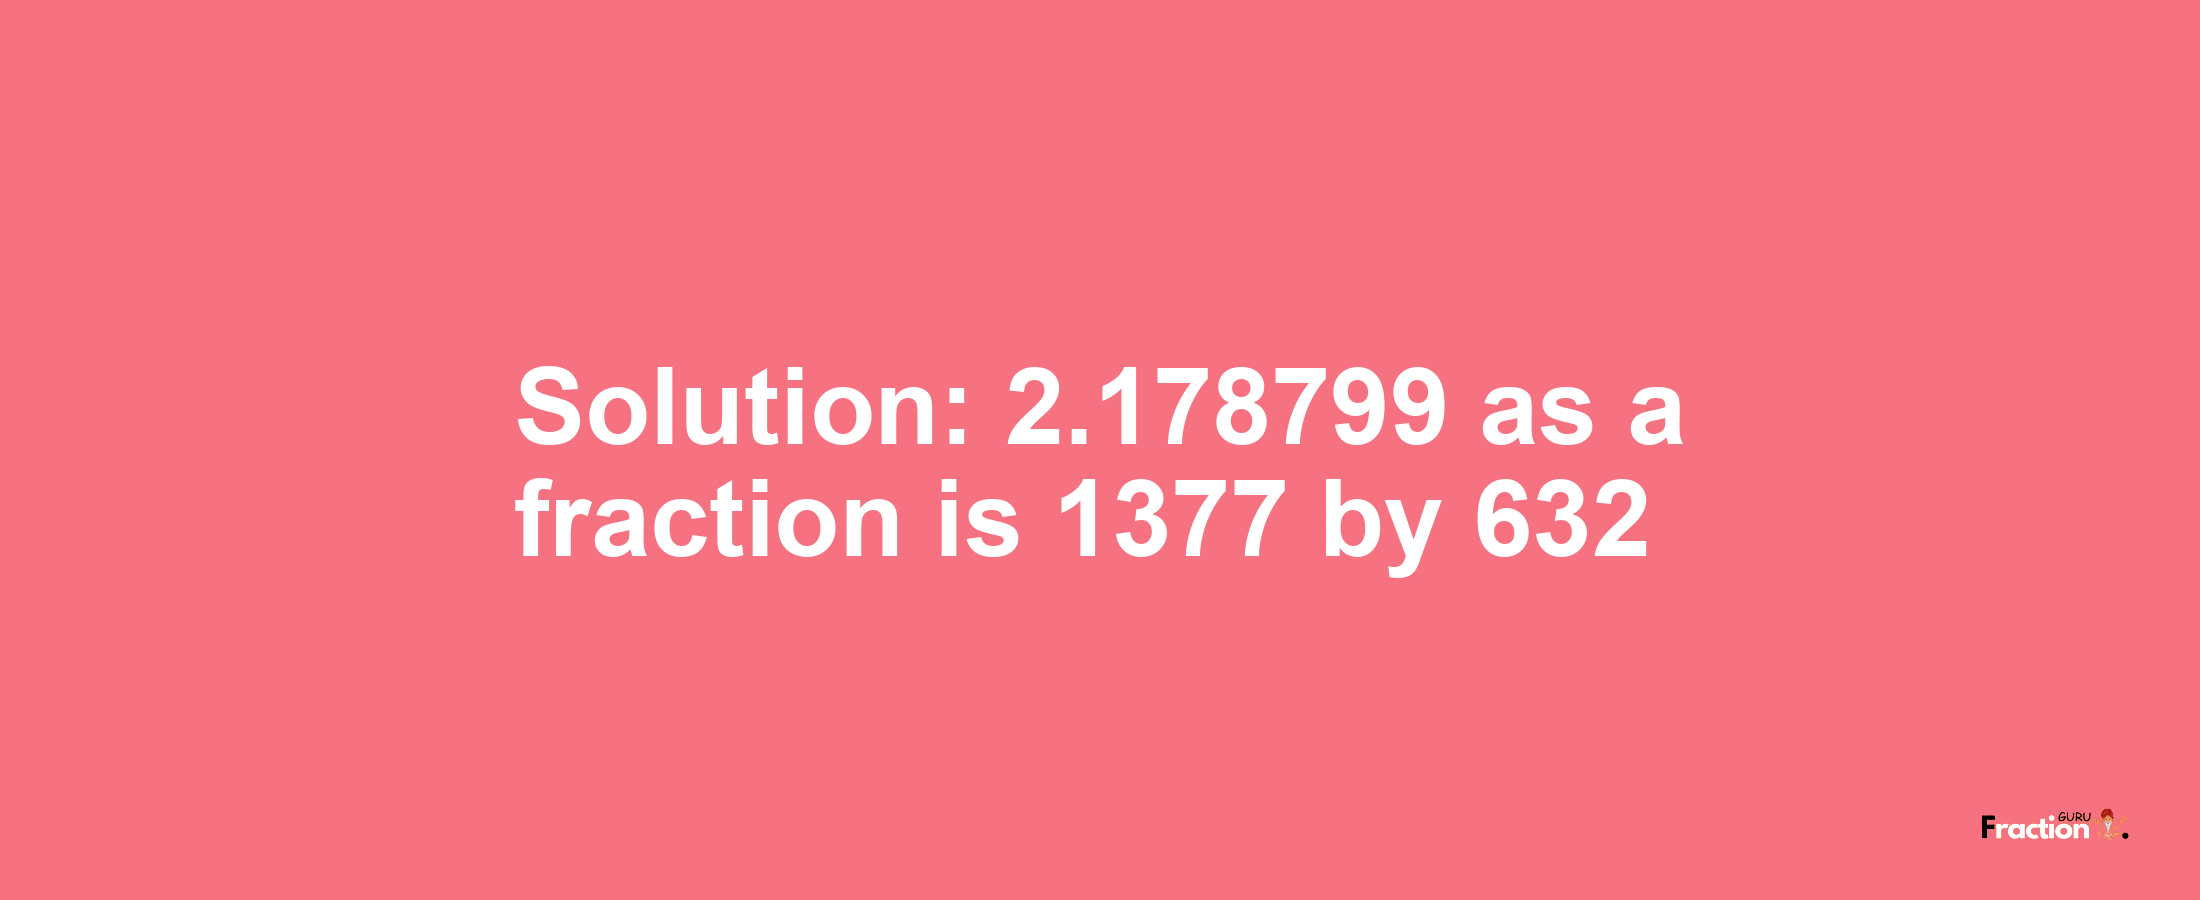 Solution:2.178799 as a fraction is 1377/632